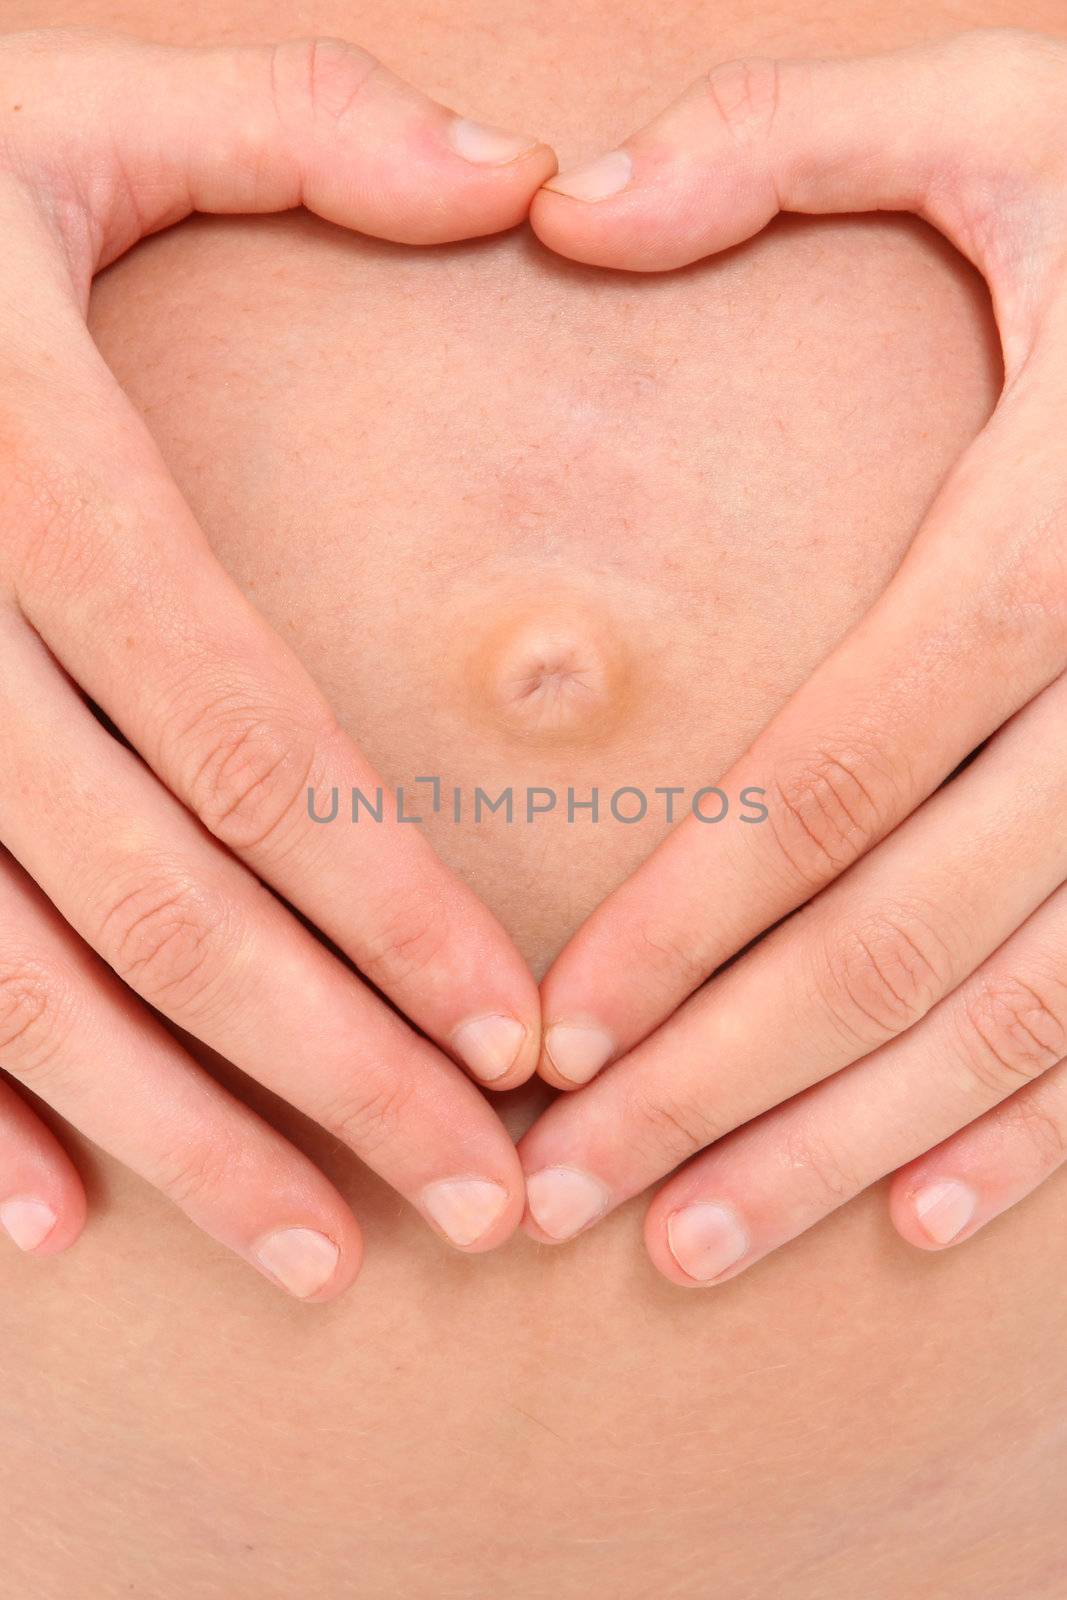 Pregnant Belly with Heart Shape Hands by duplass